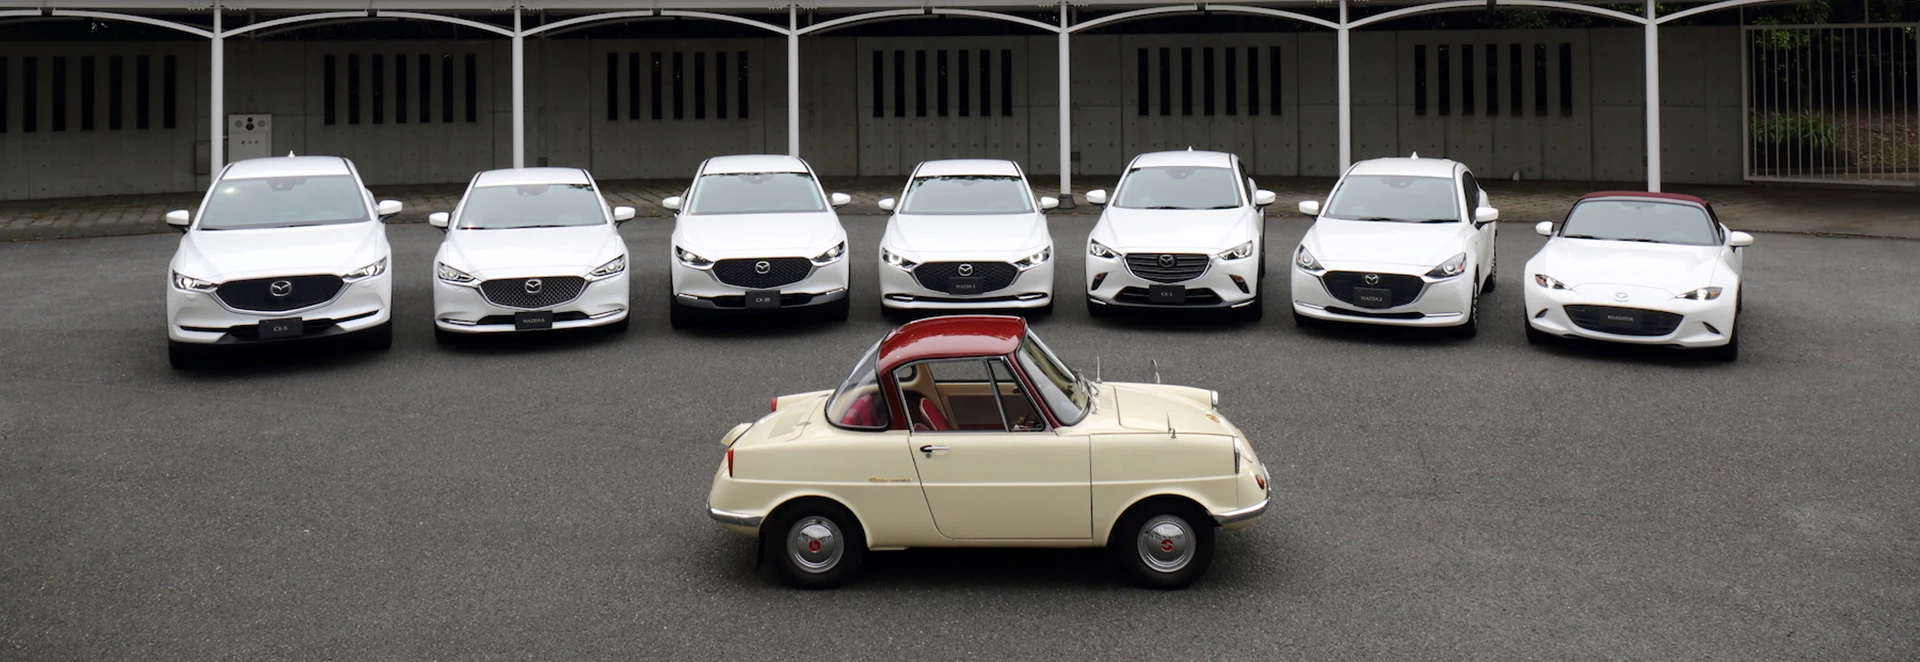 Mazda announces pricing for new 100th Anniversary special edition models 